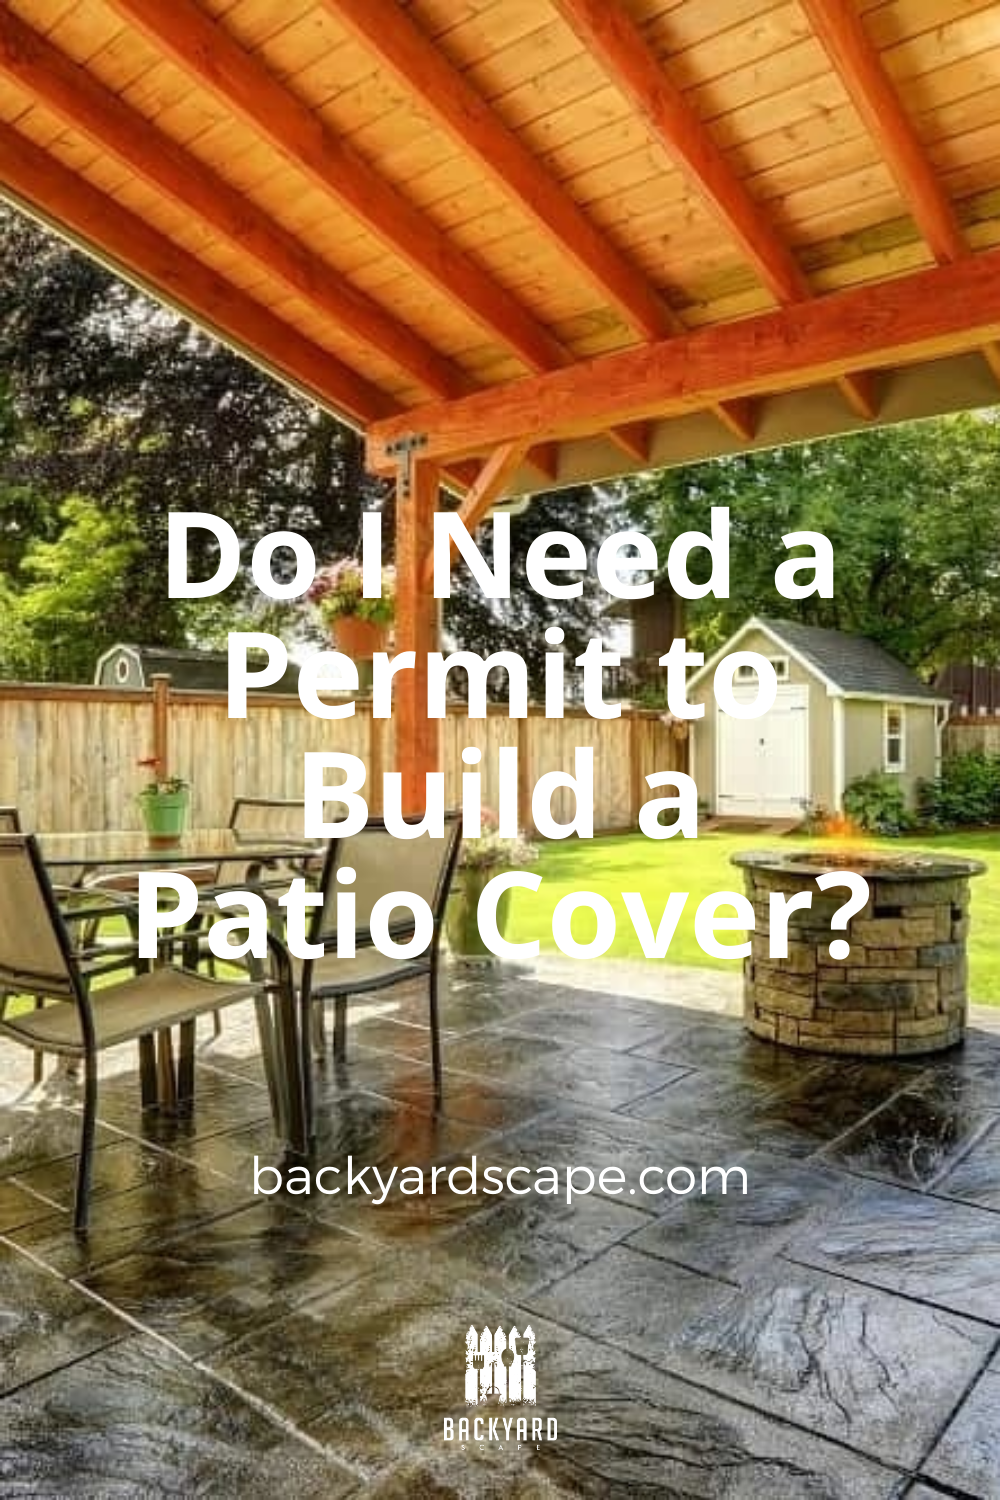 Do I Need a Permit to Build a Patio Cover?